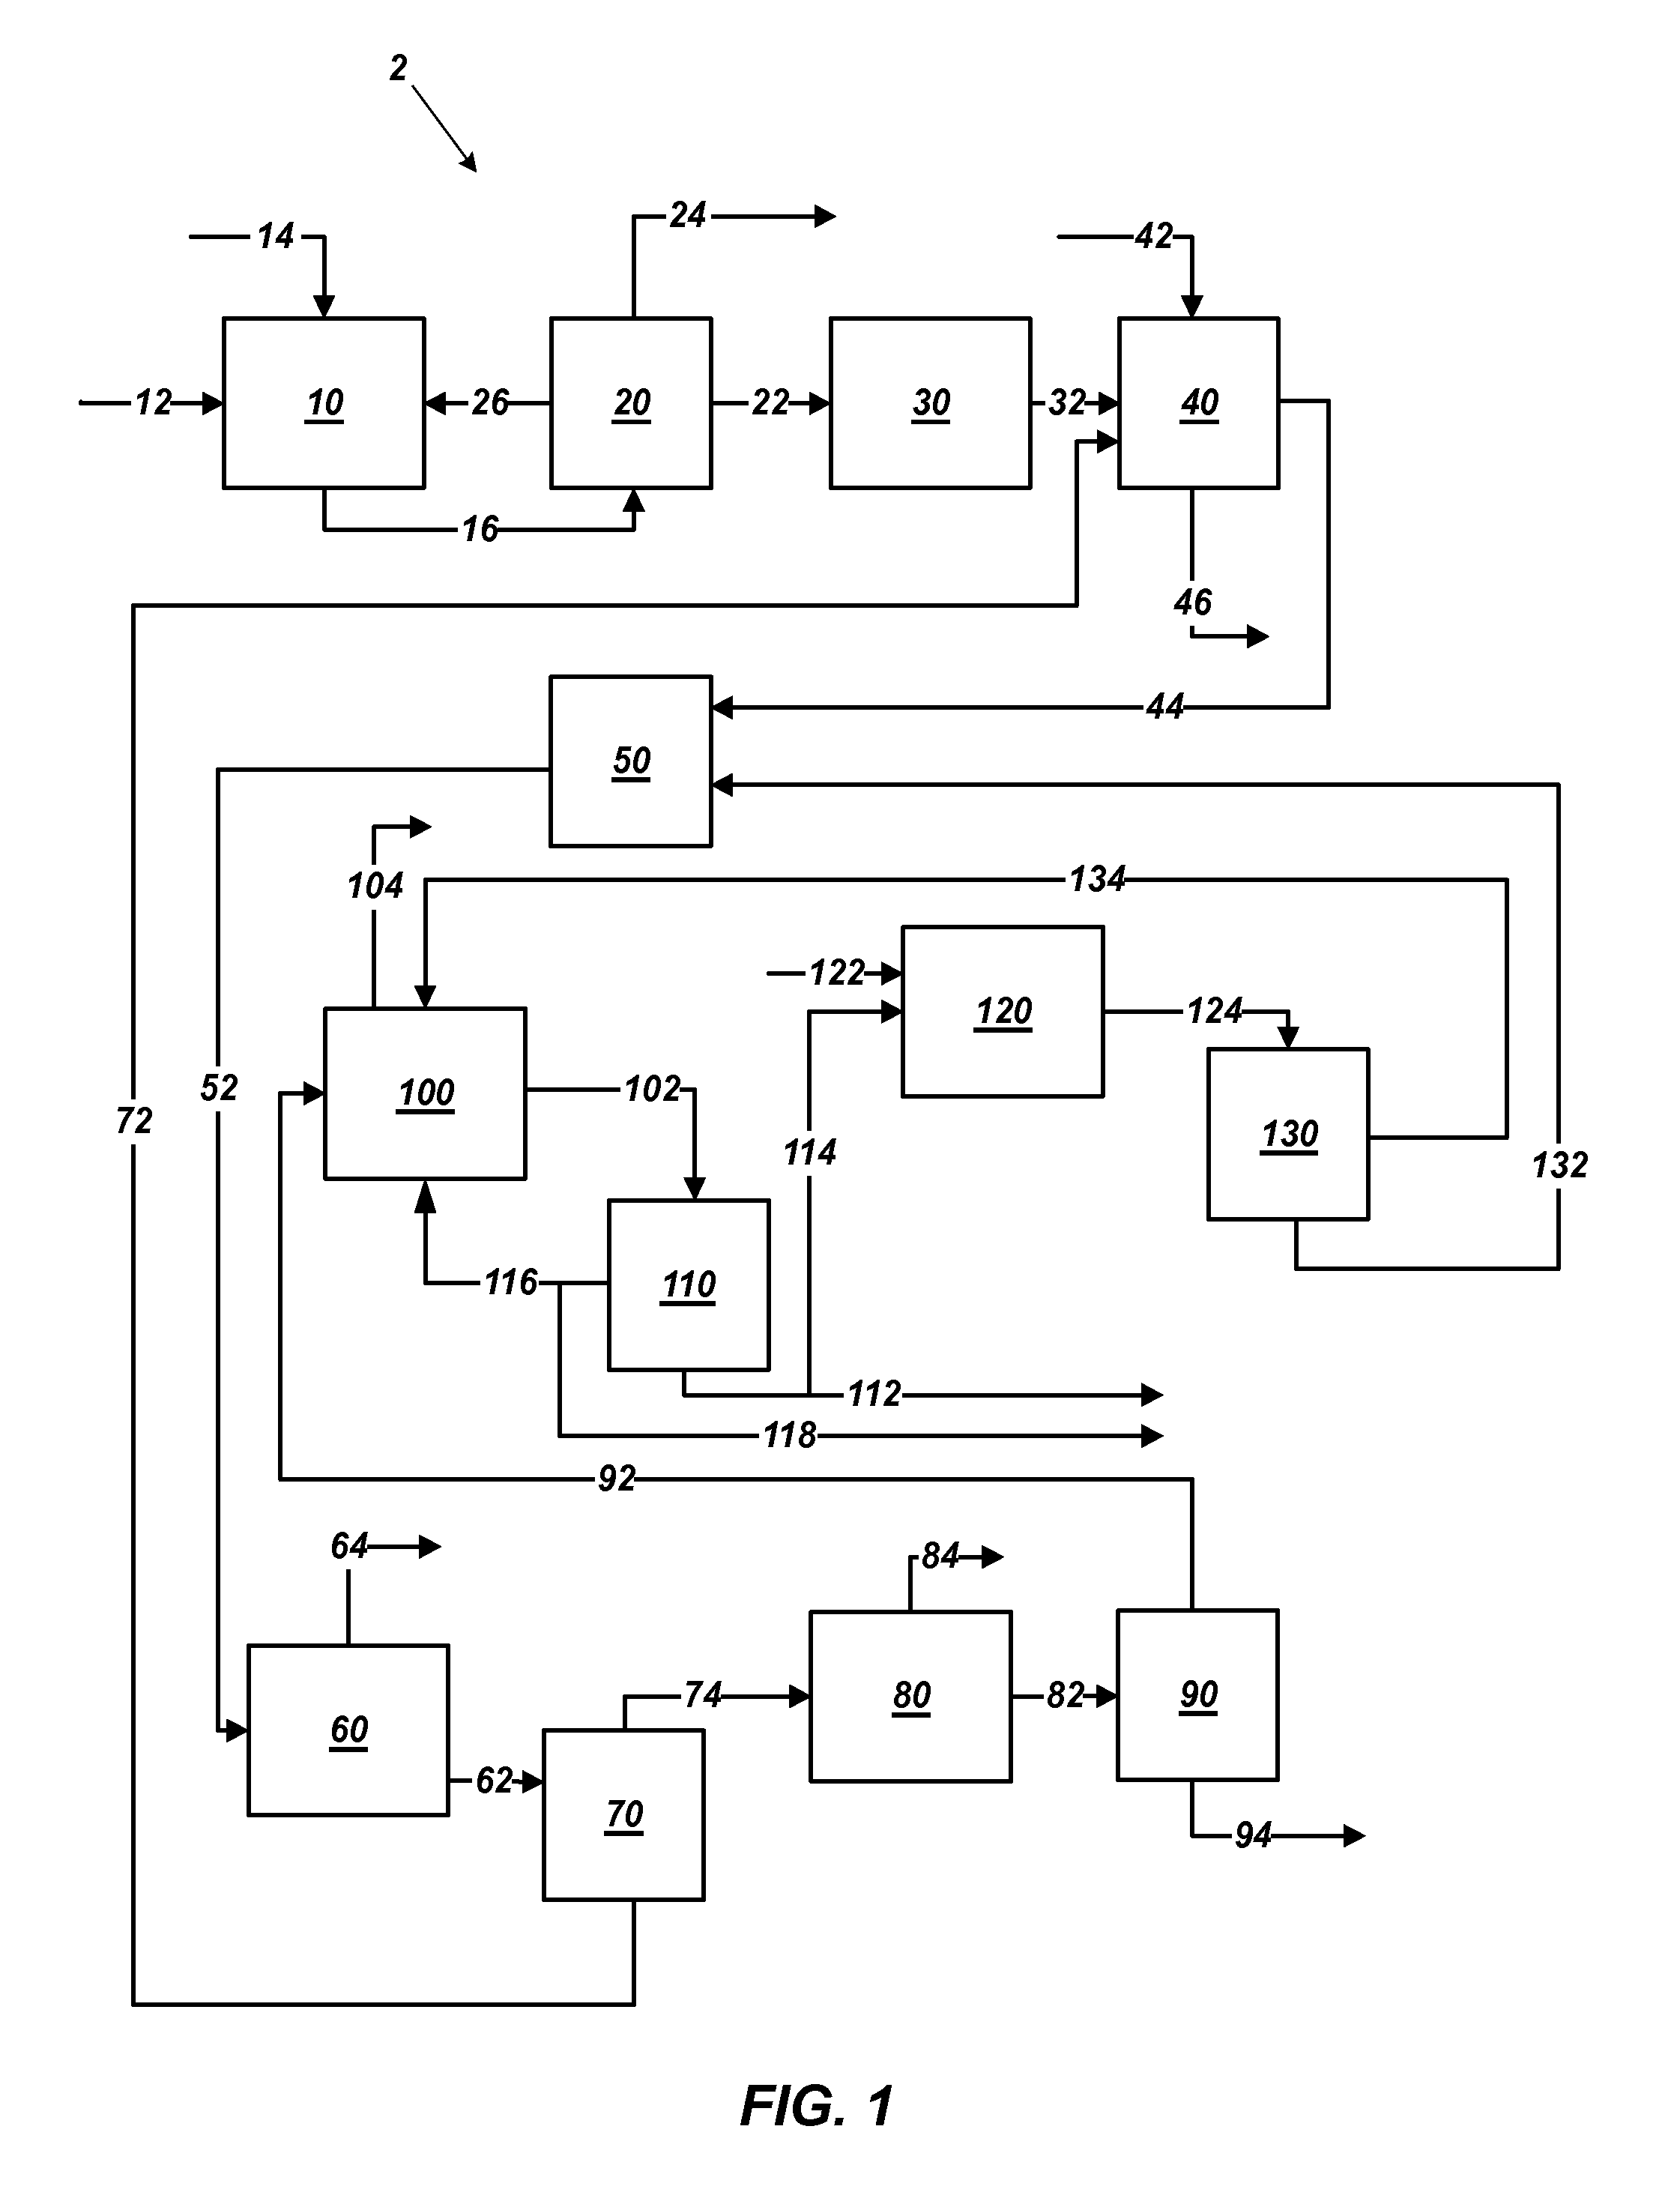 Methods of processing polyhalite ore, methods of producing potassium sulfate, and related systems